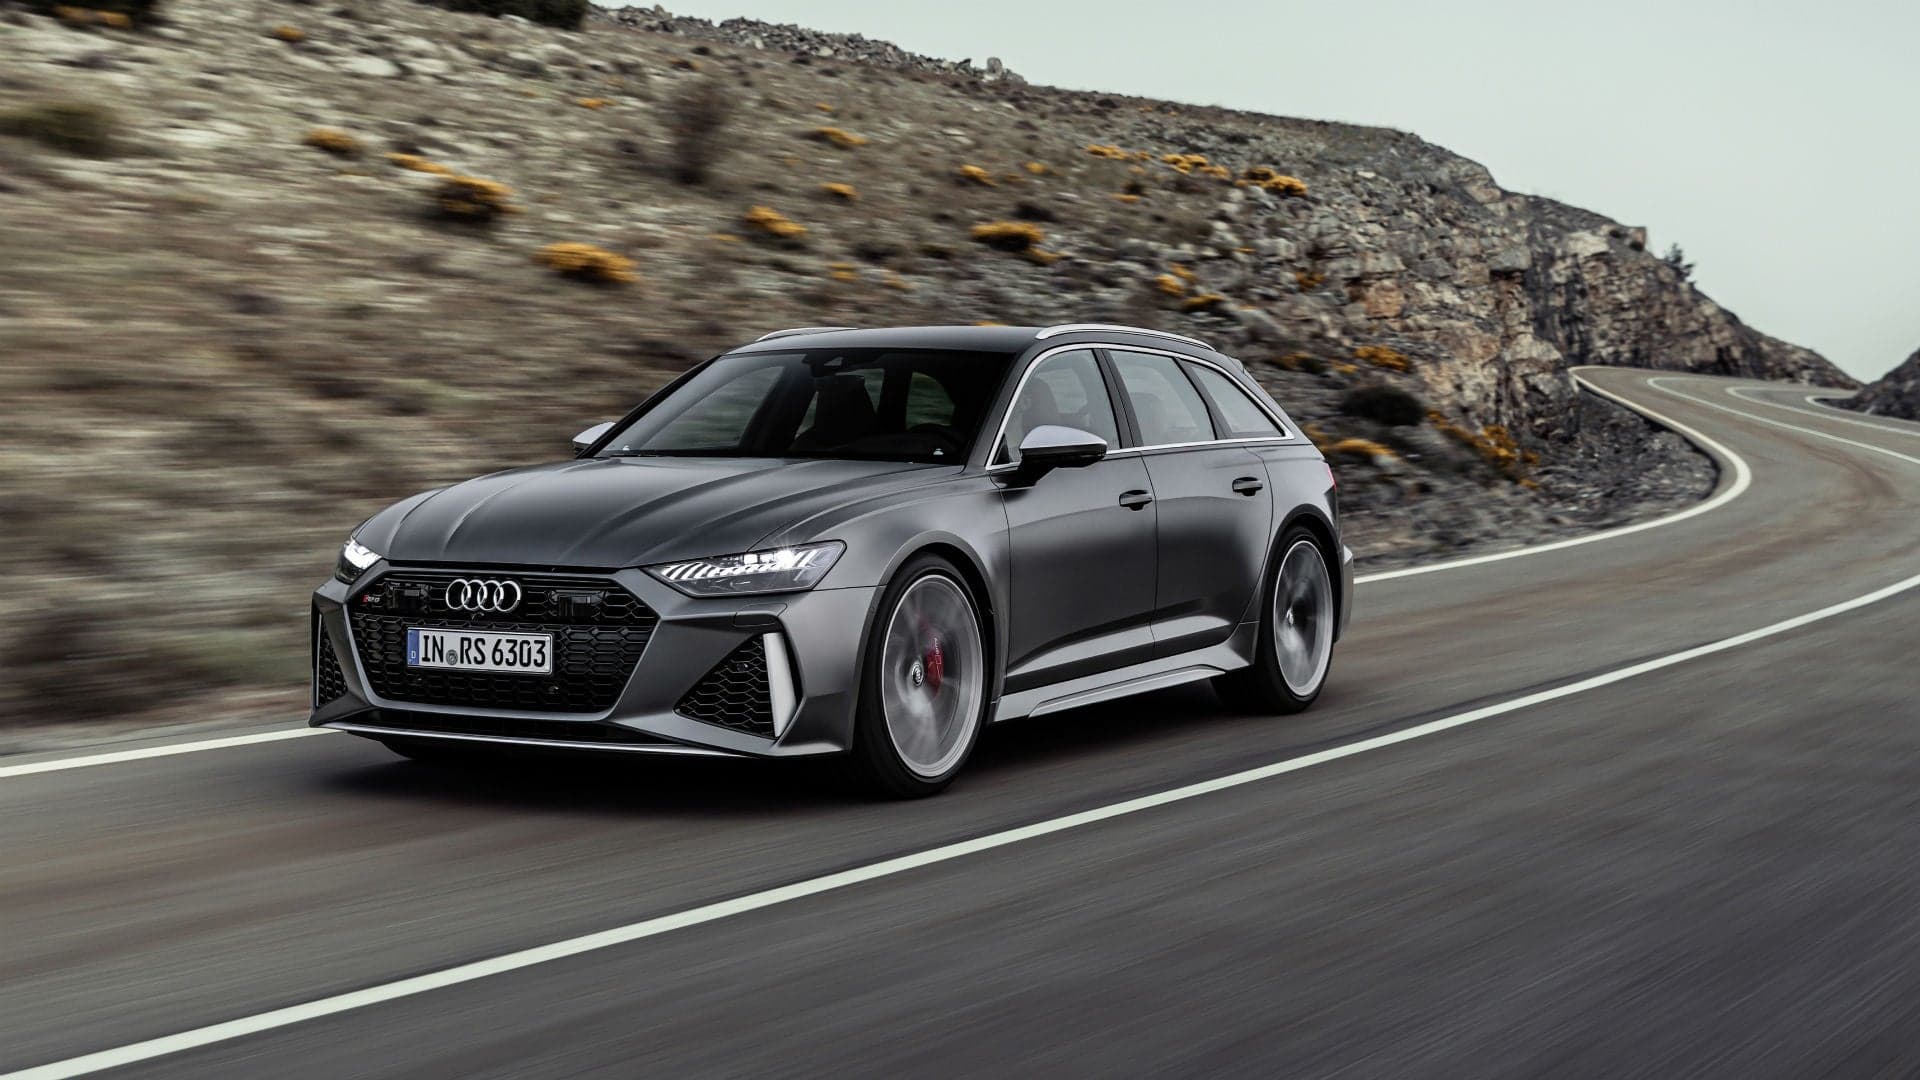 Listen to the 2020 Audi RS6 Avant Produce Four Straight Minutes of Twin-Turbo V8 Grunt